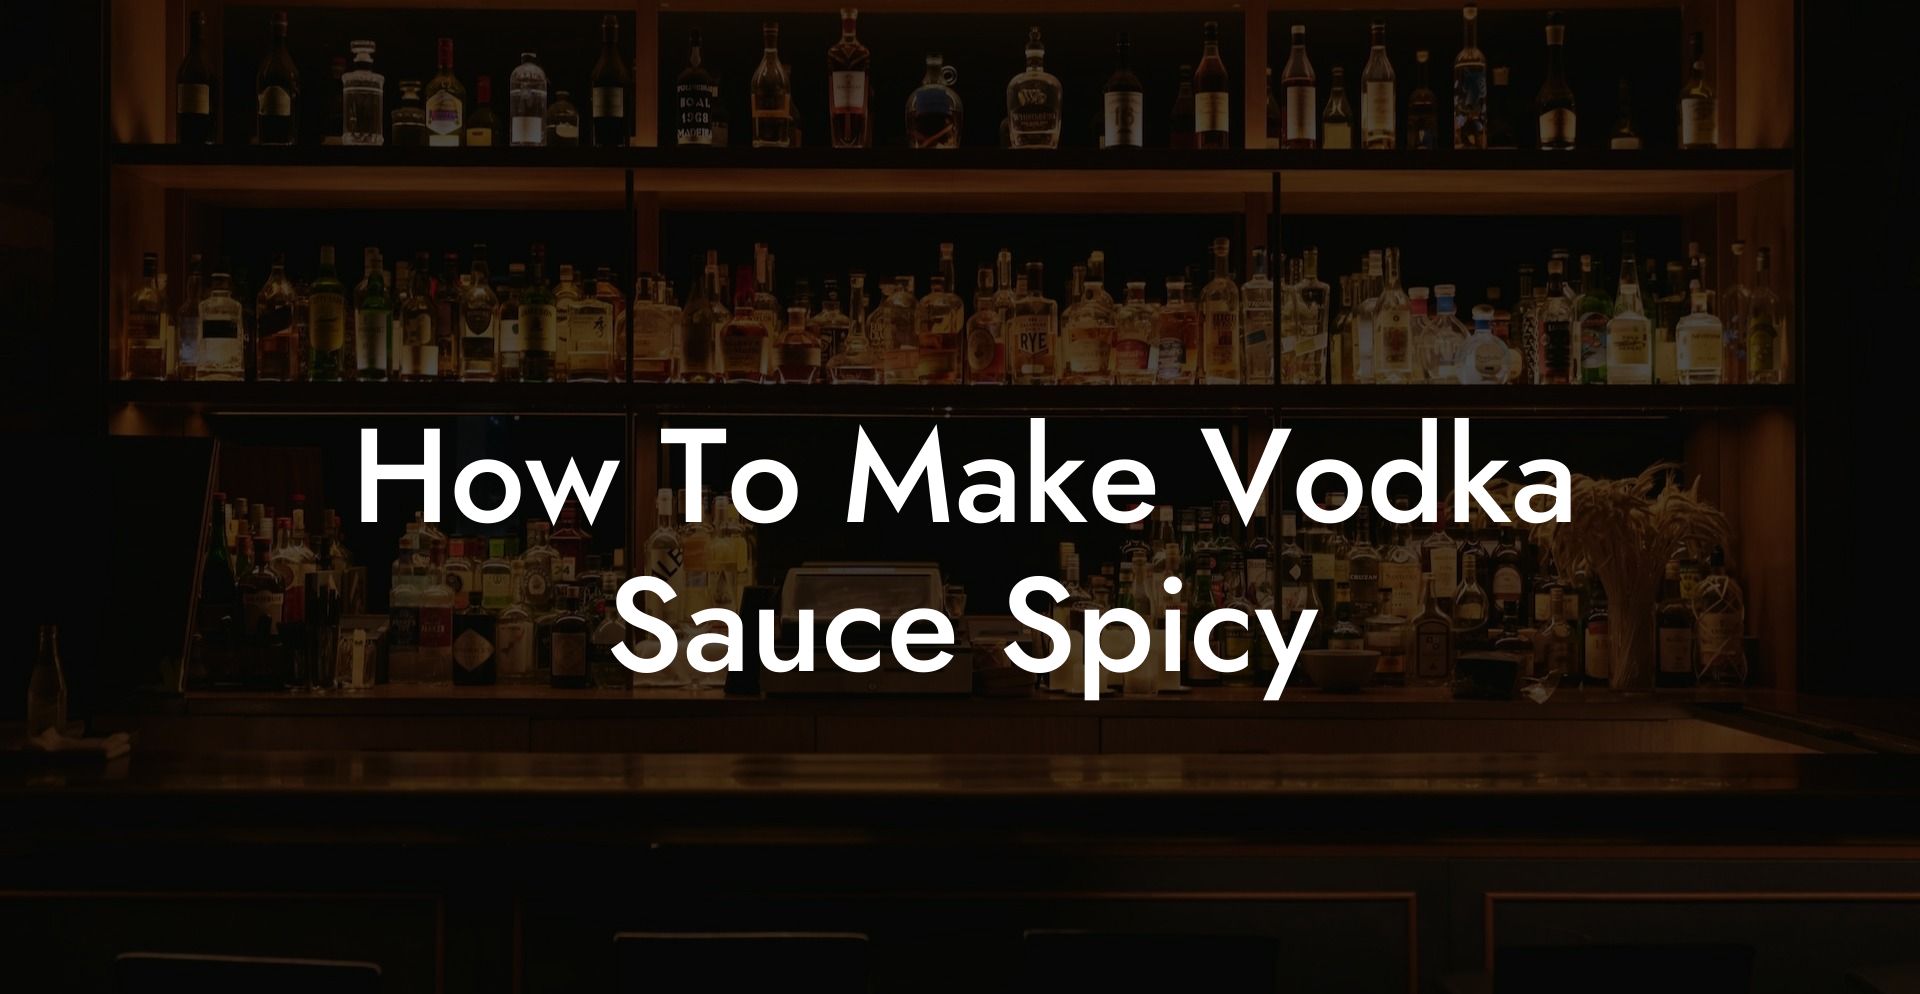 How To Make Vodka Sauce Spicy